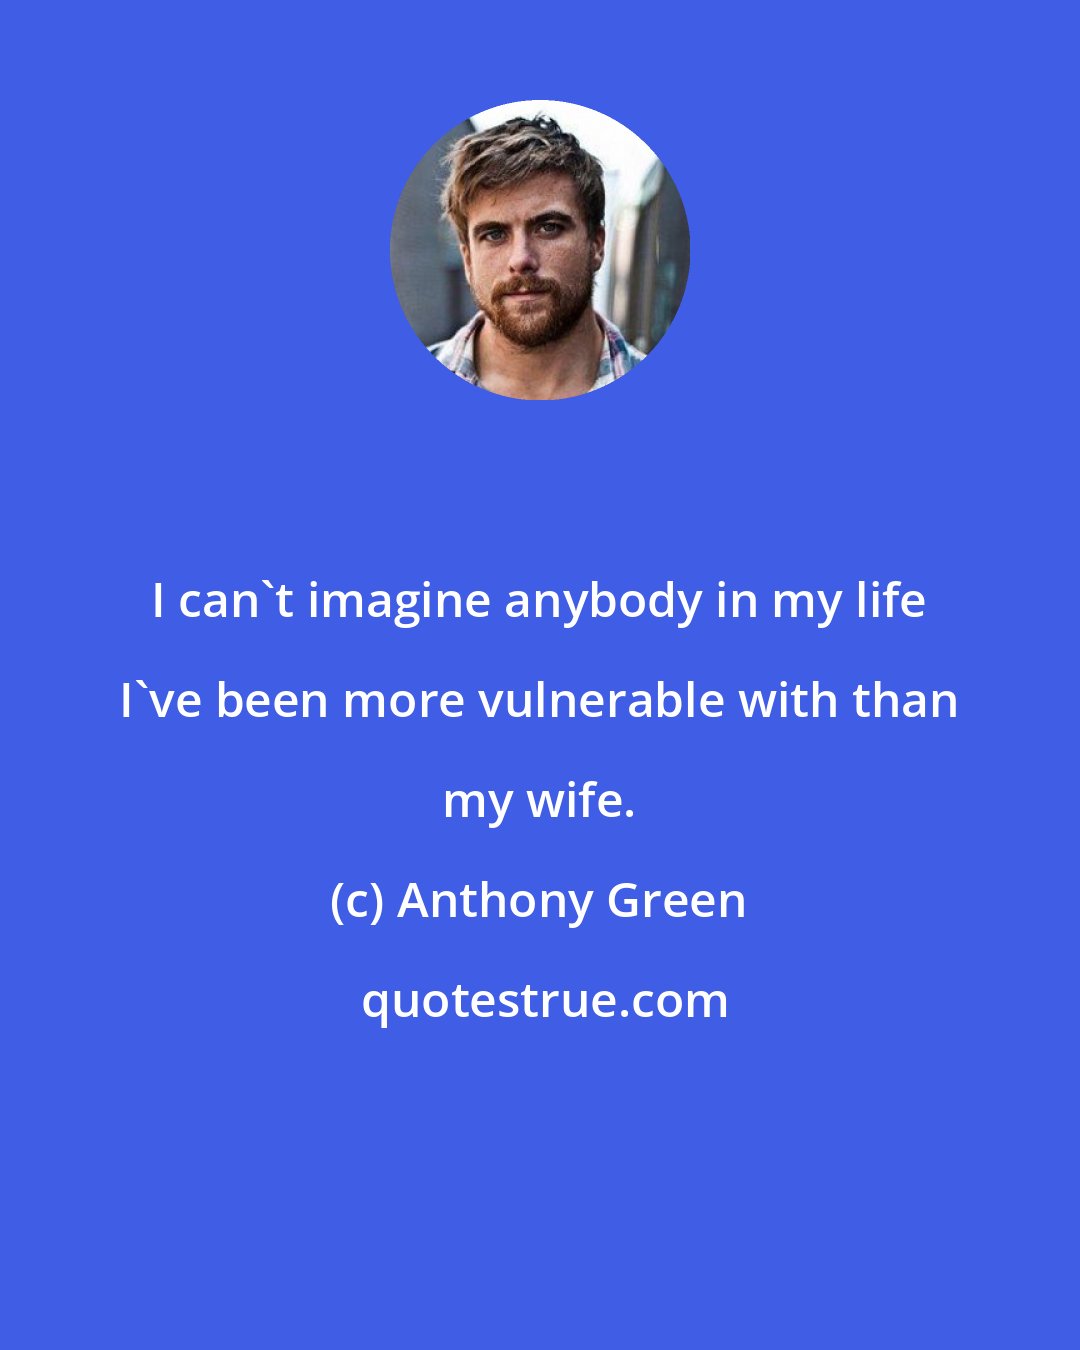 Anthony Green: I can't imagine anybody in my life I've been more vulnerable with than my wife.